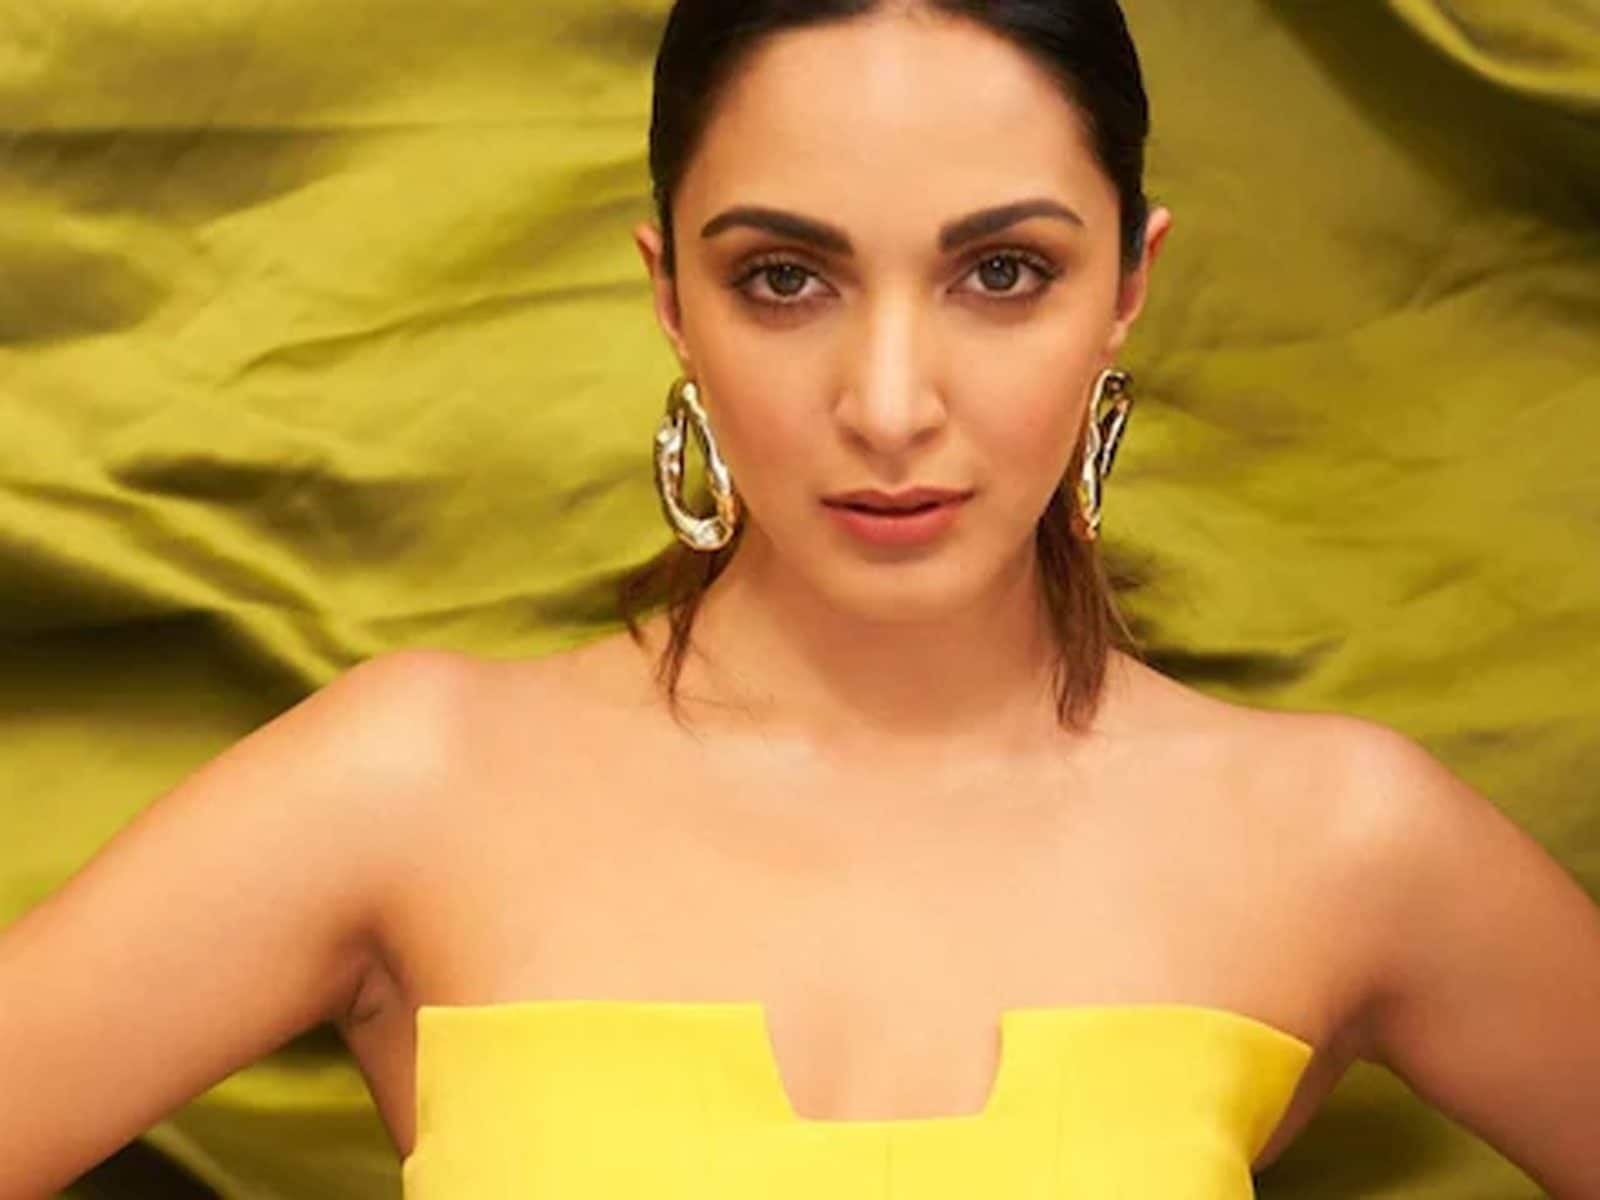 Found This Gem': Kiara Advani's First-ever Ad Film; Guess Her Age - News18